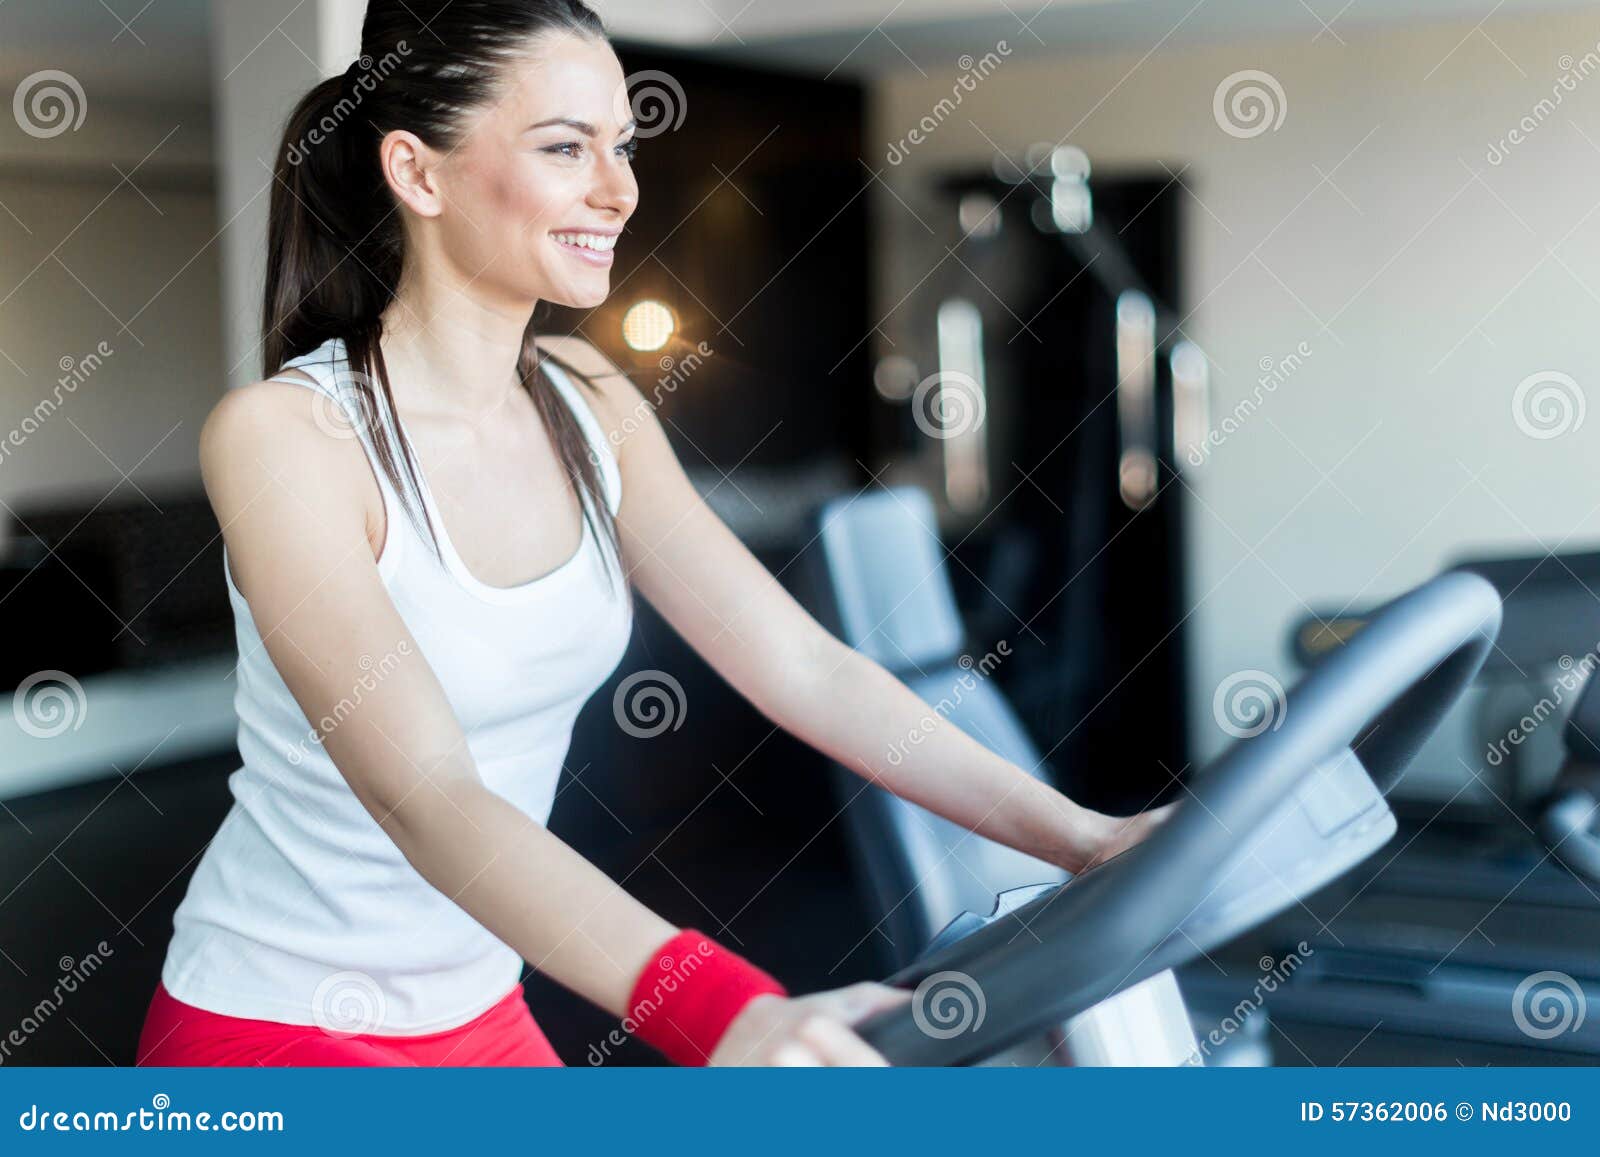 Beautiful, Young Lady Riding the Bicycle in a Gym Stock Photo - Image ...